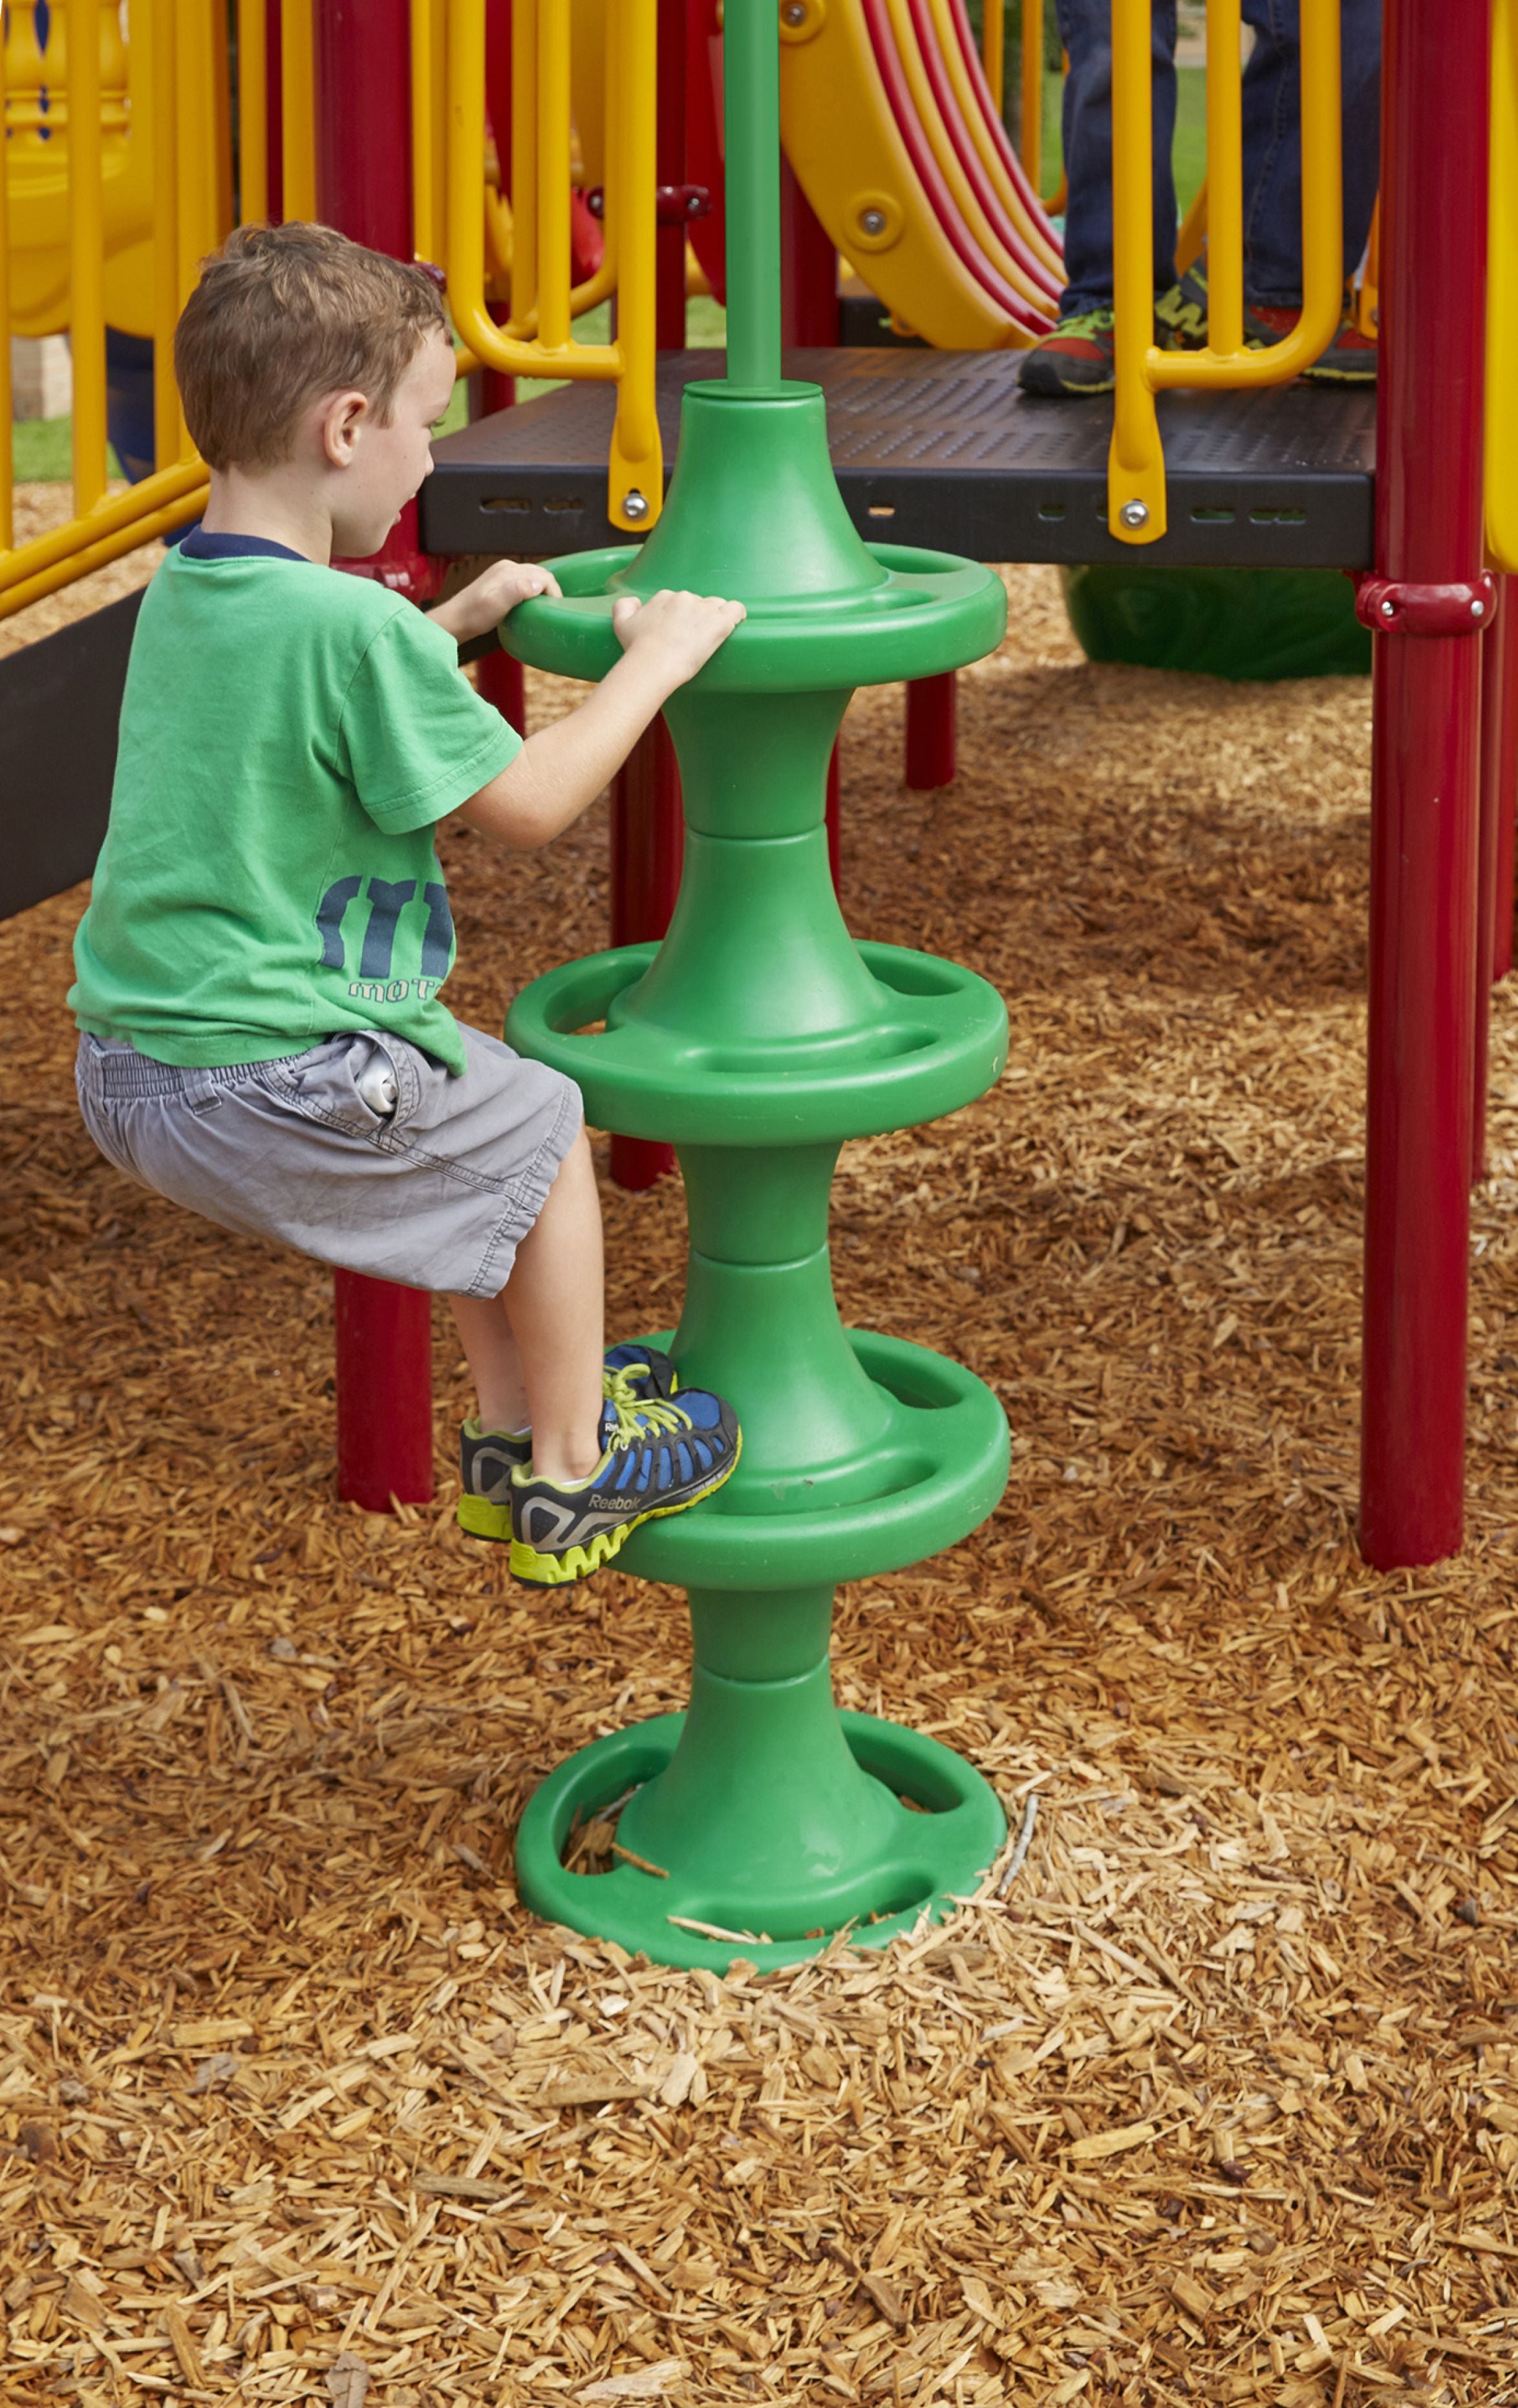 Carsons Canyon Playsystem - Natural or Playful Colors